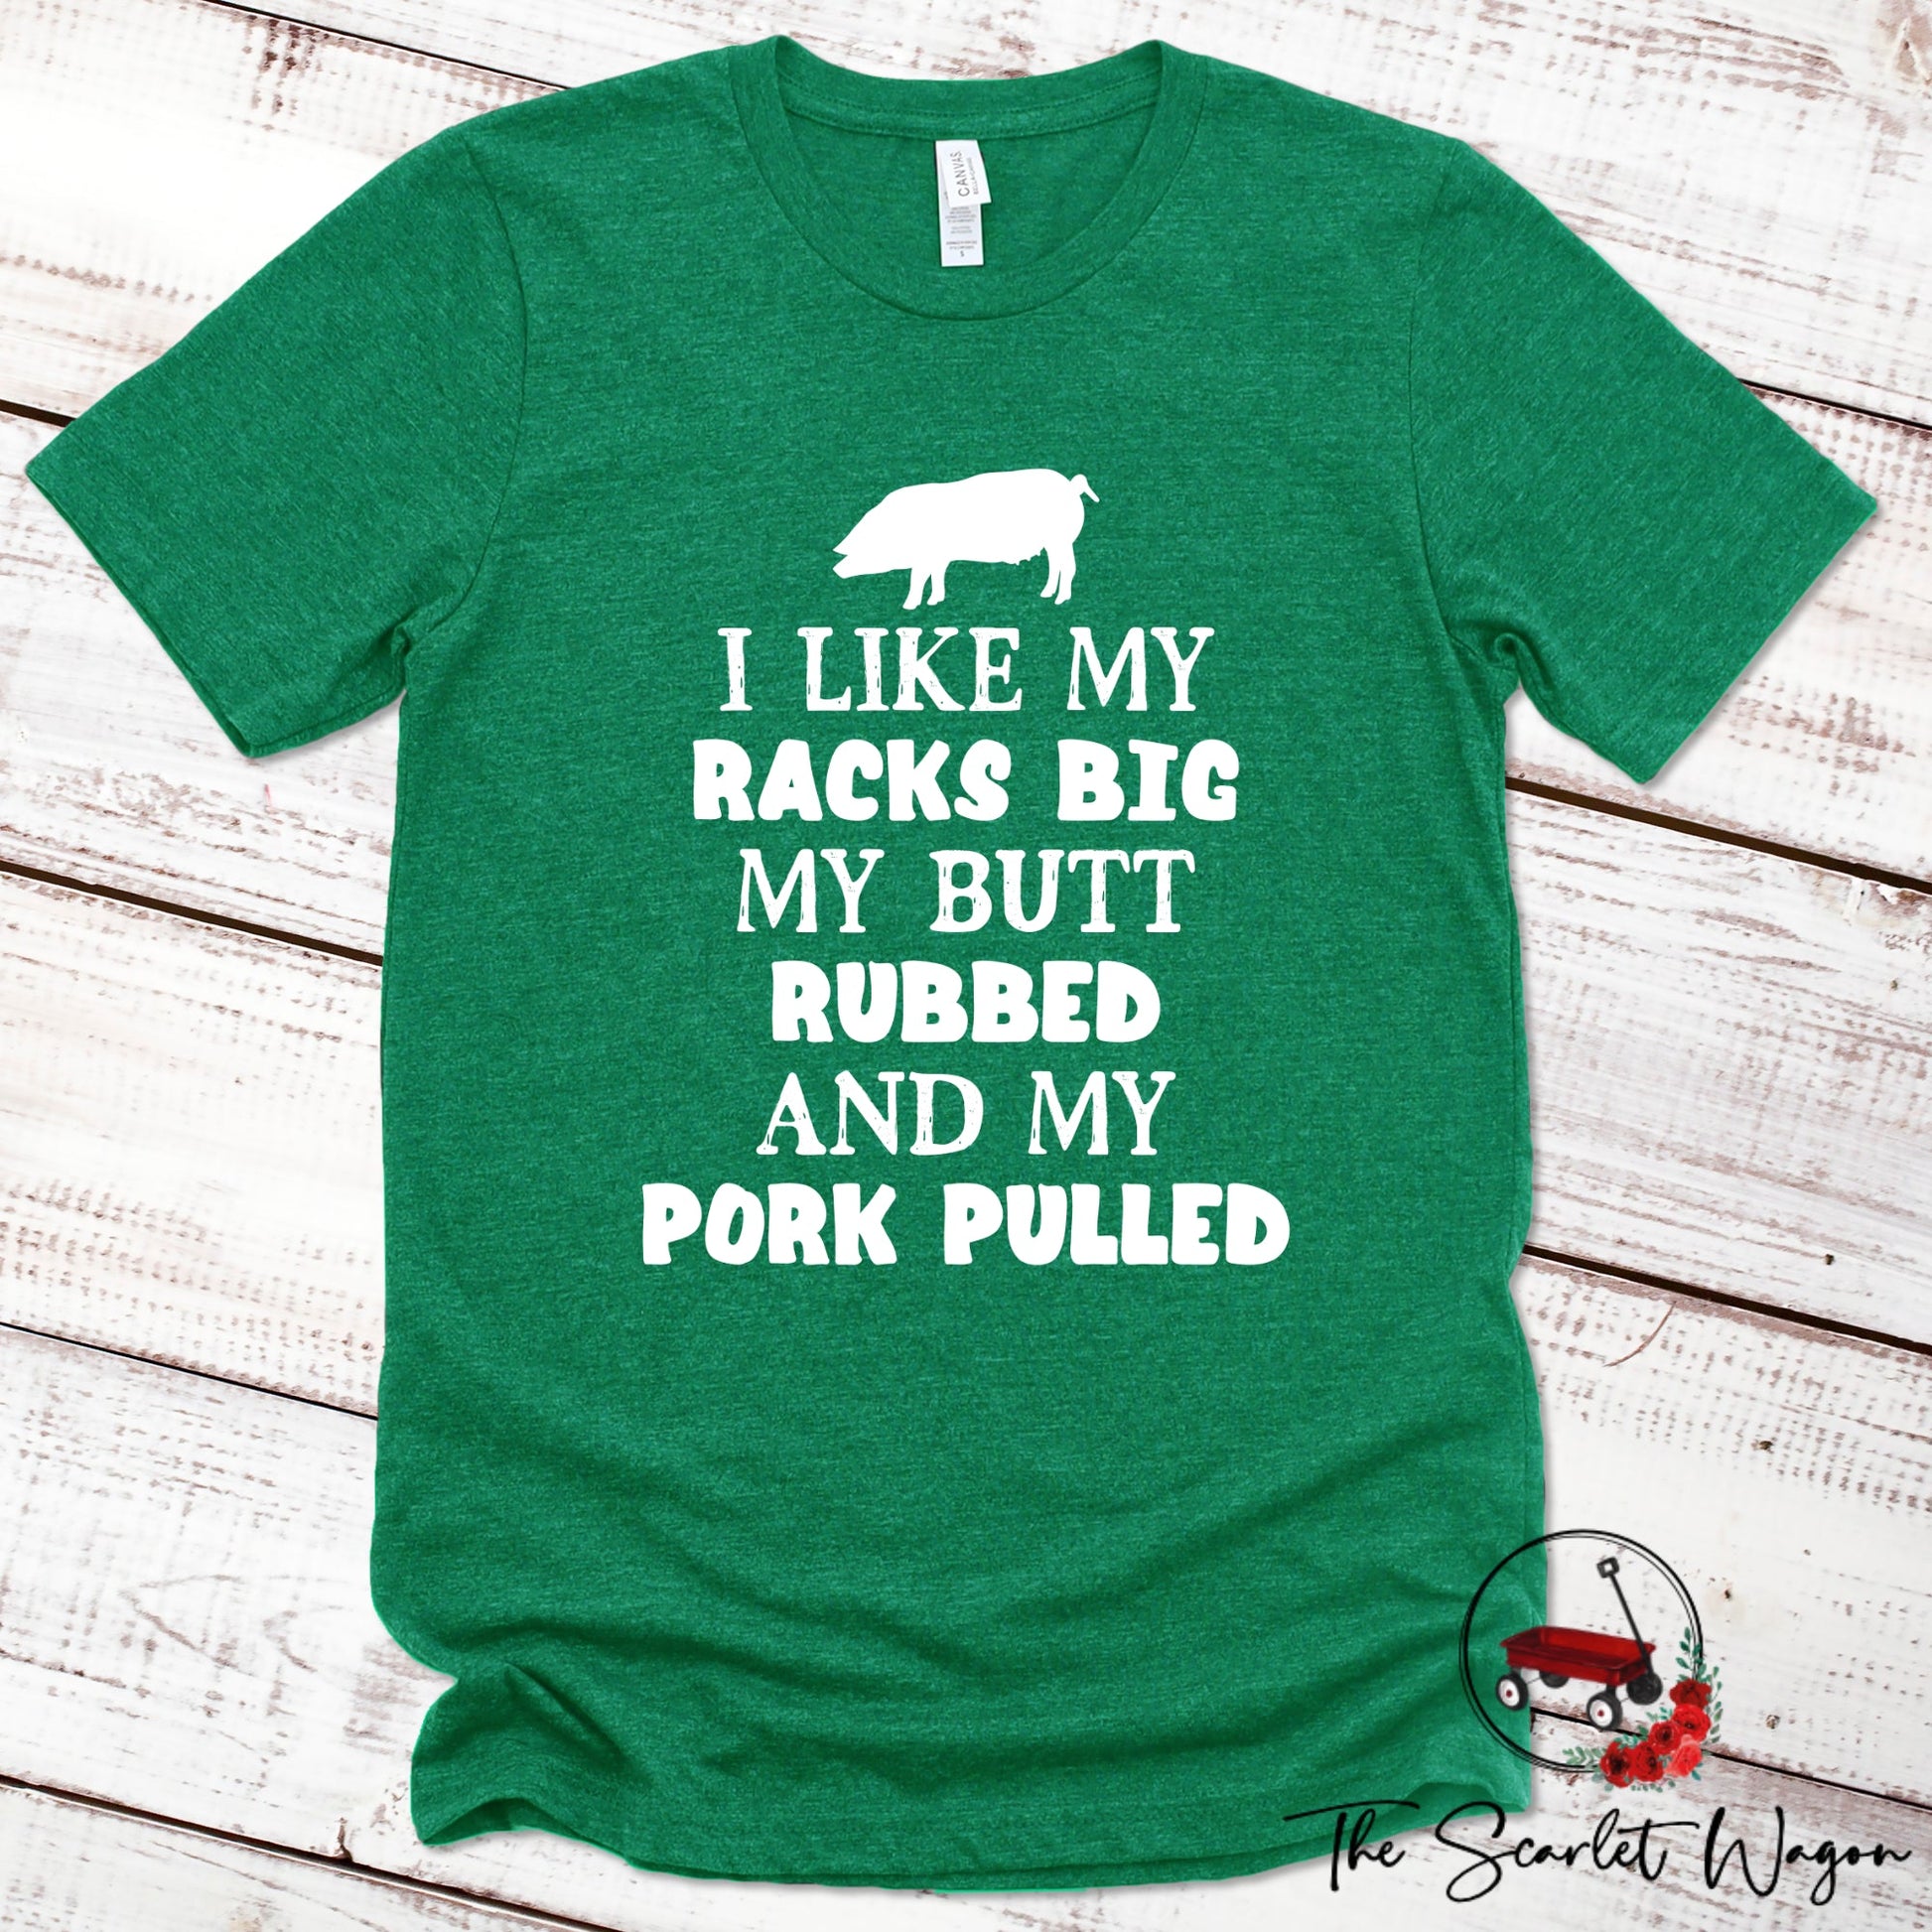 I Like My Racks Big, My Butt Rubbed and My Pork Pulled Premium Tee Scarlet Wagon Heather Green XS 